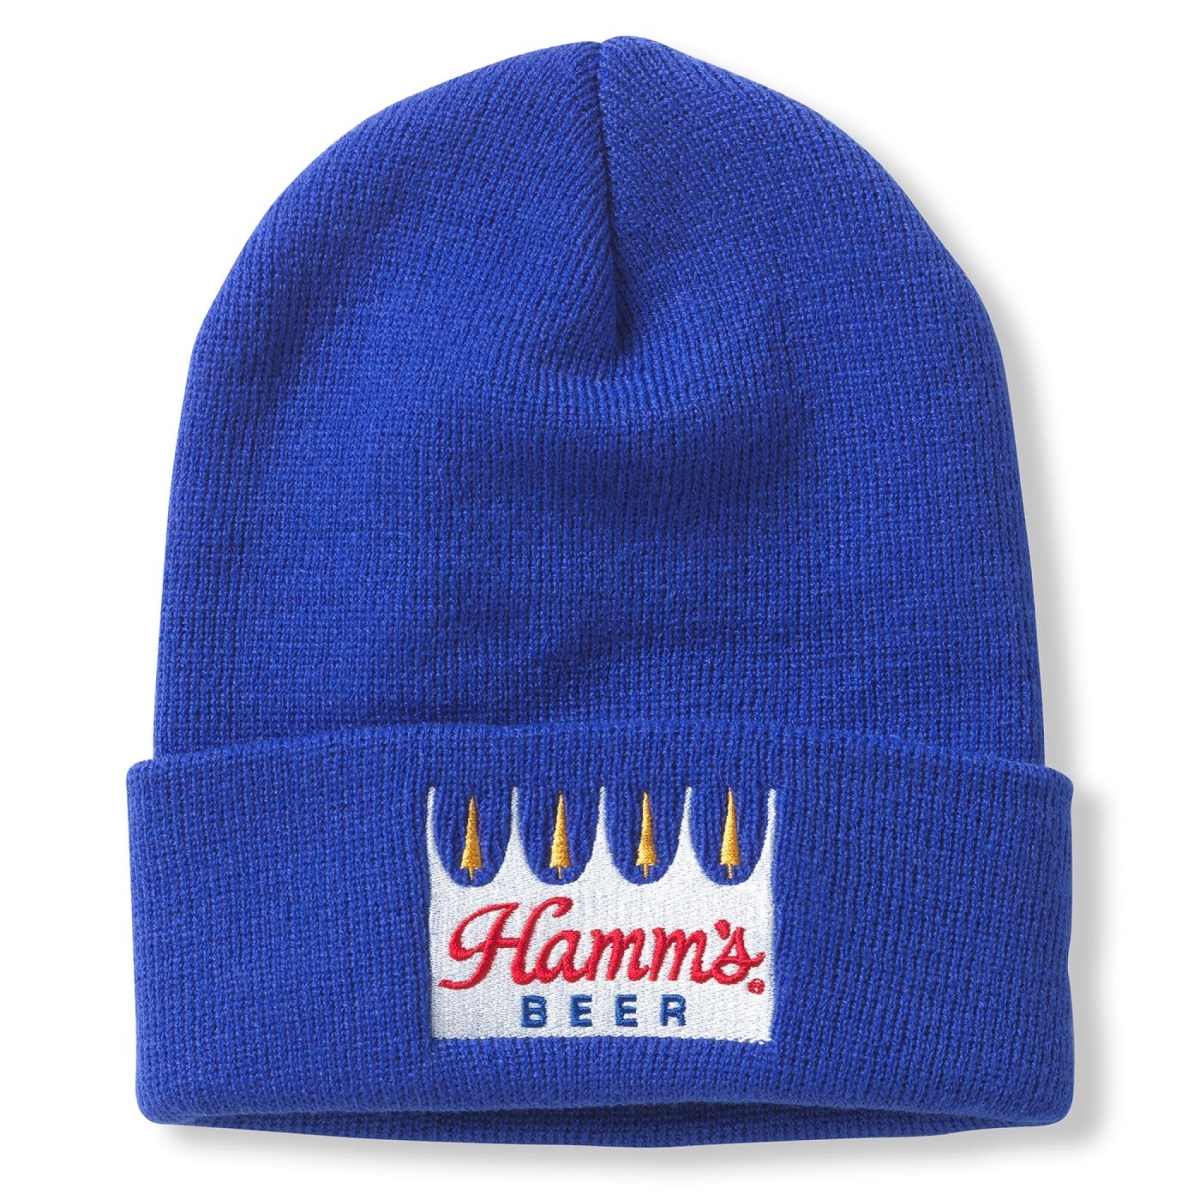 Picture of Hamms 834845 Beer Embroidered Logo Cuffed Knit Beanie